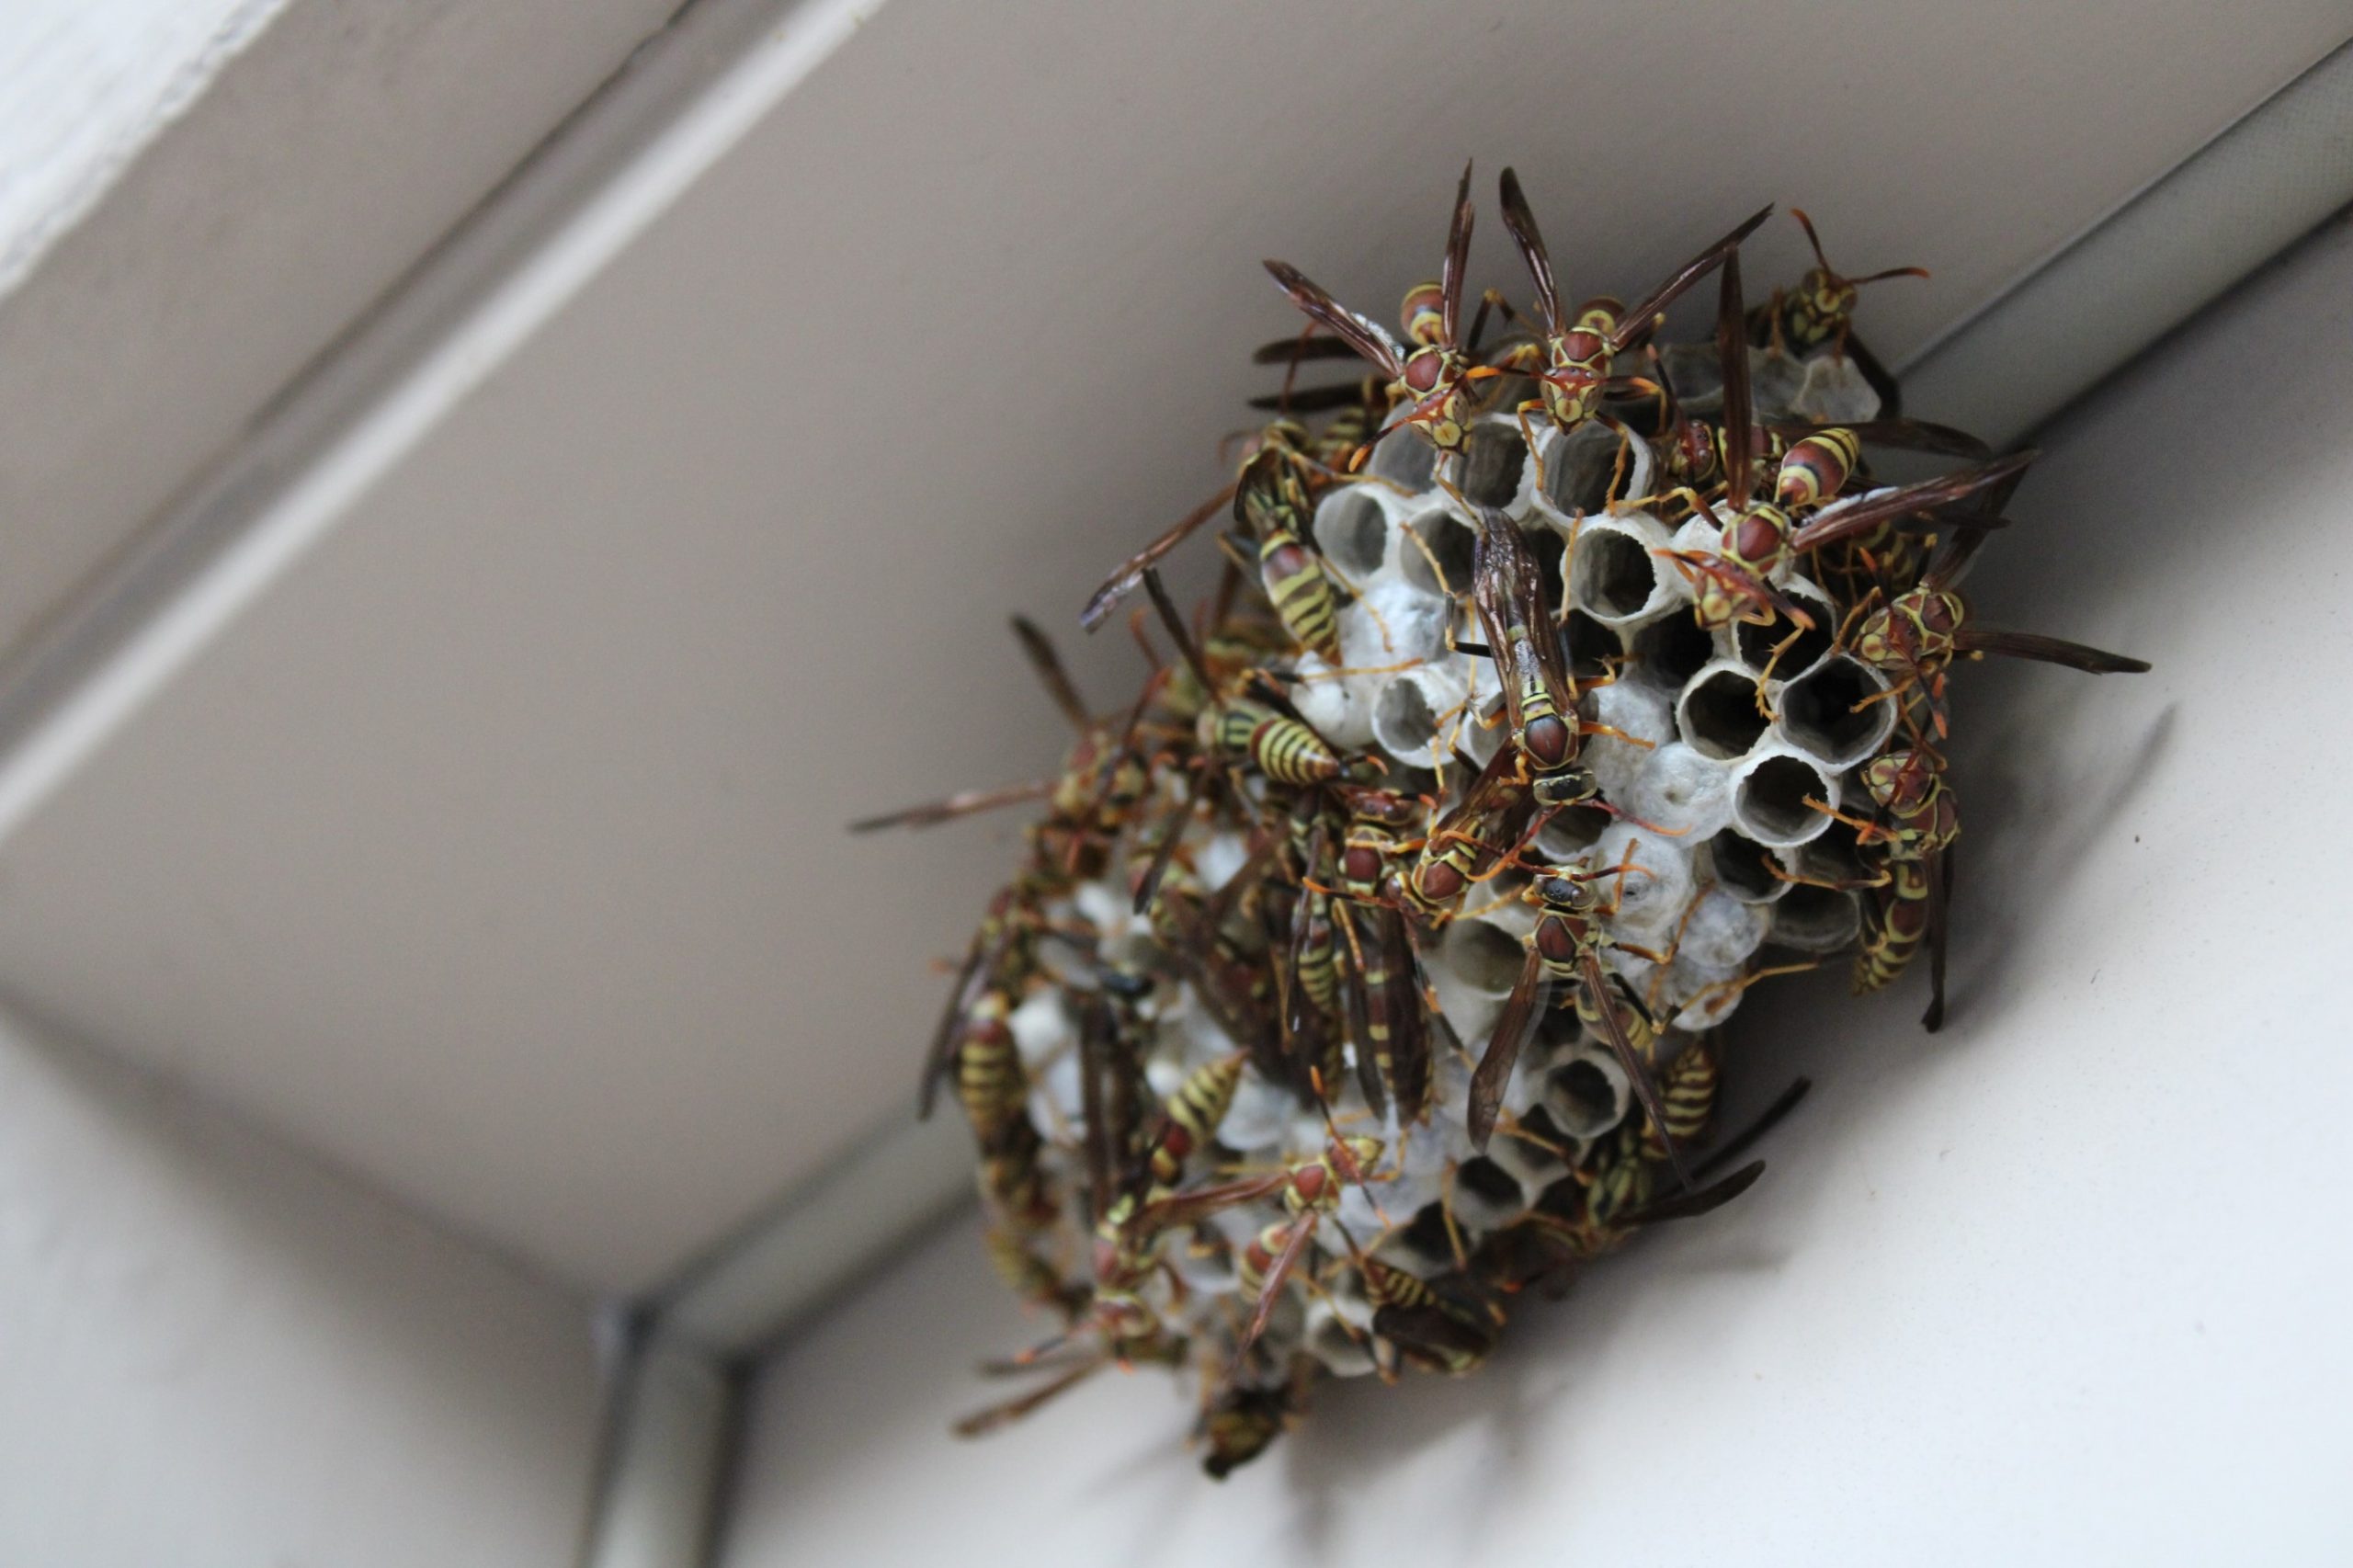 Wasp nest removal services in Auckland